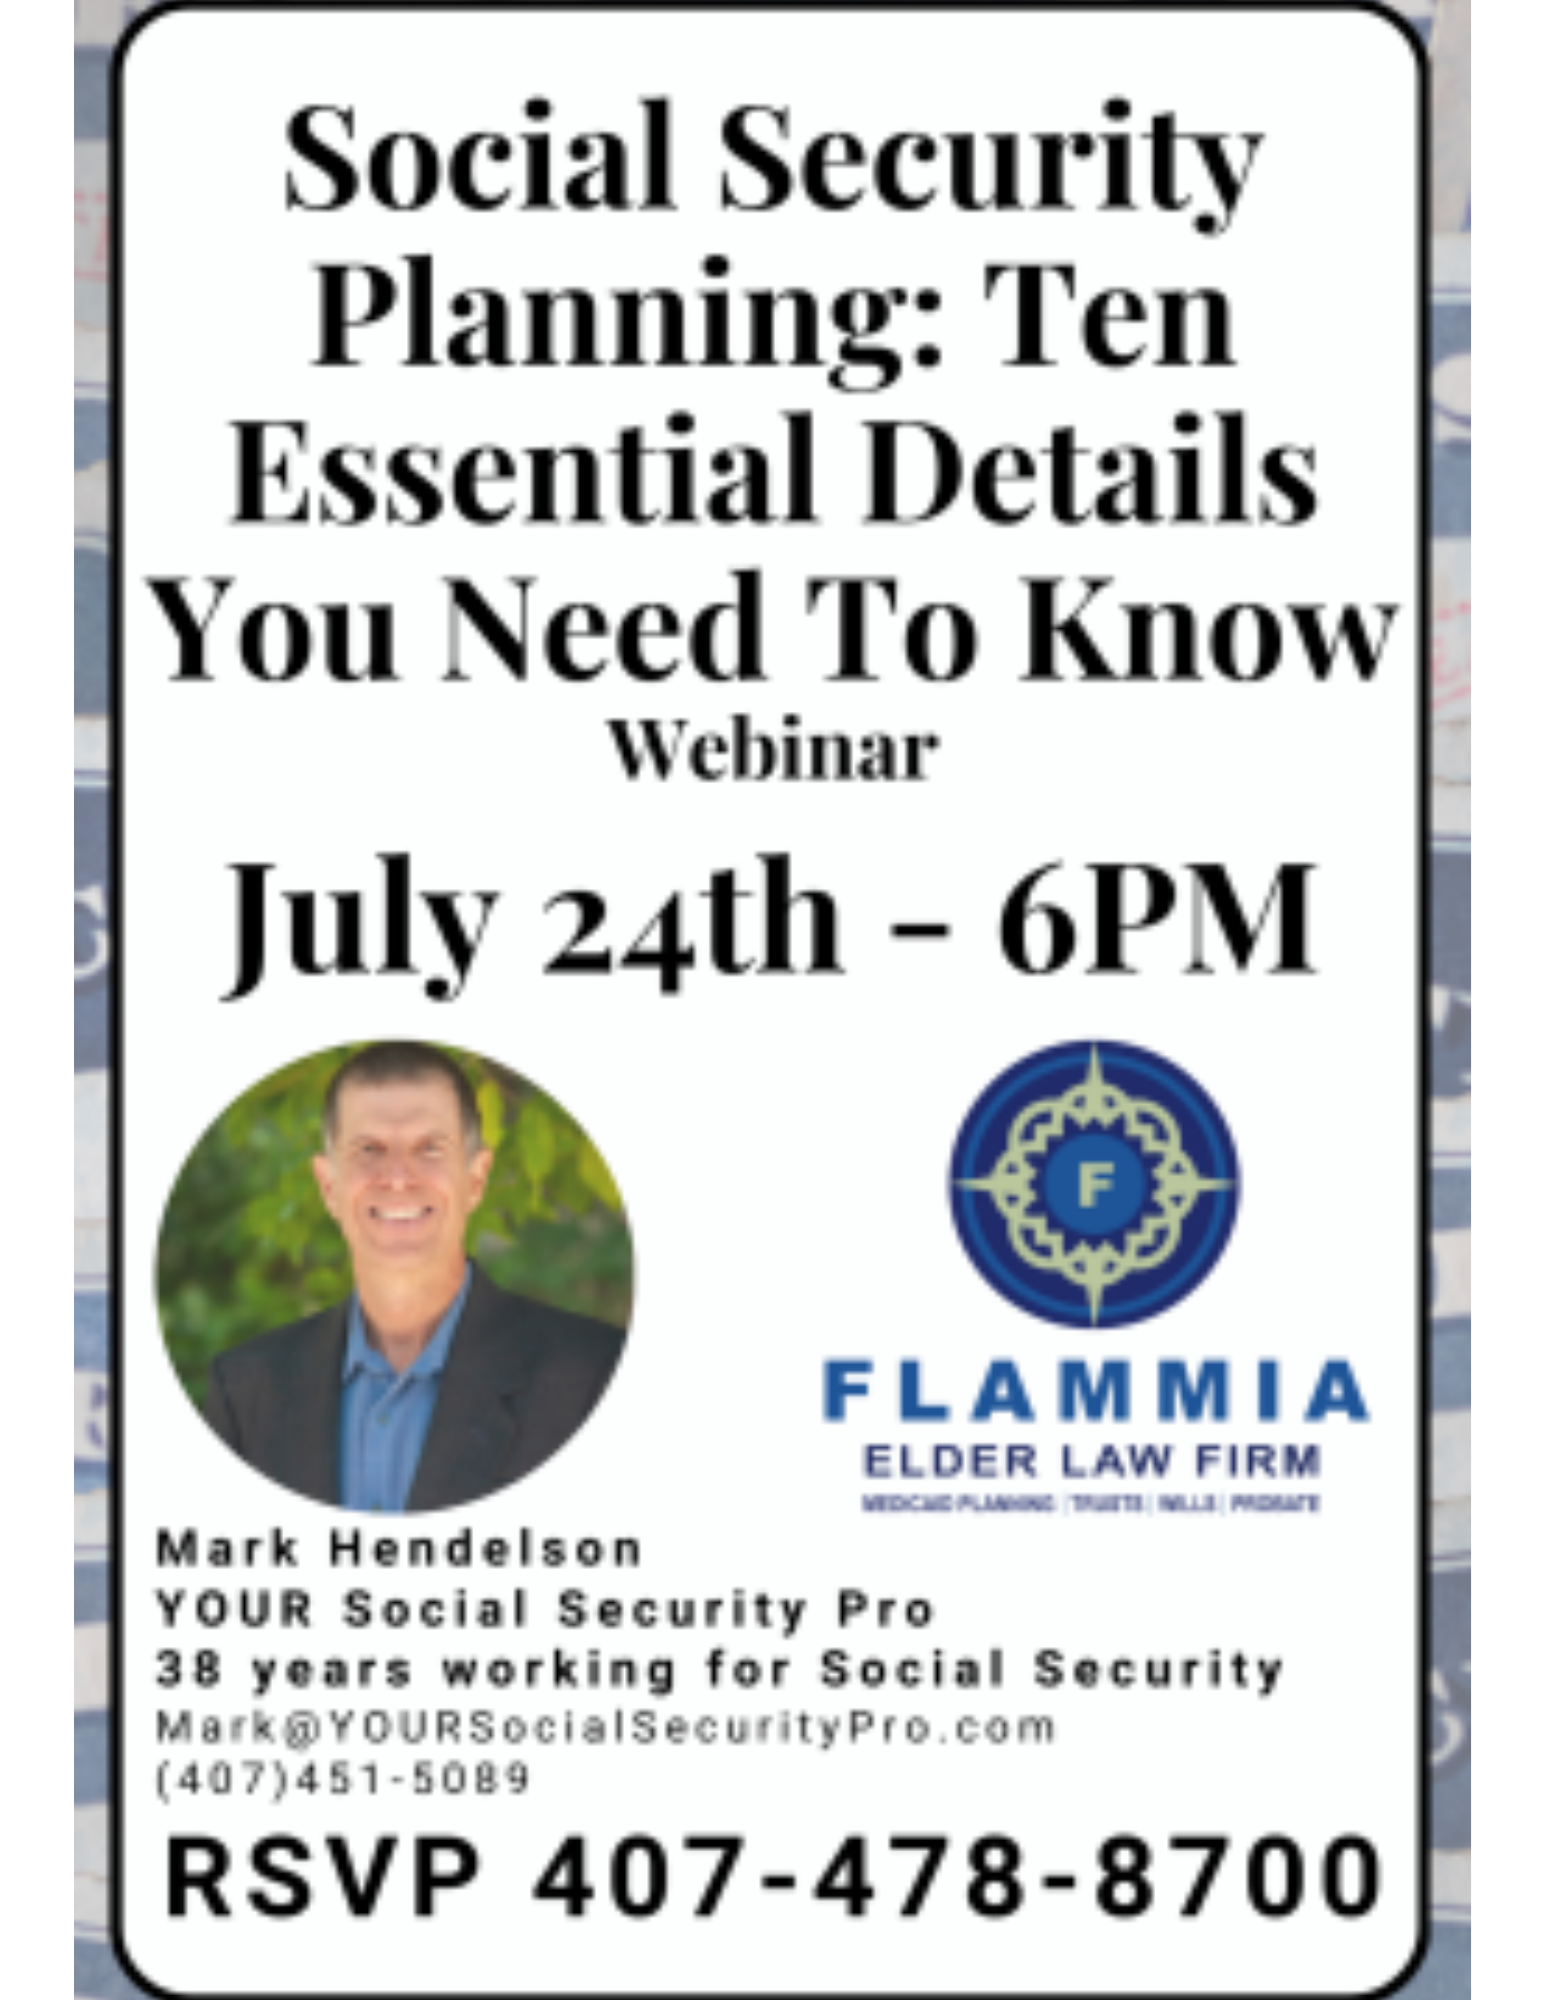 WEBINAR - Social Security Planning: Ten Essential Details You Need to Know!